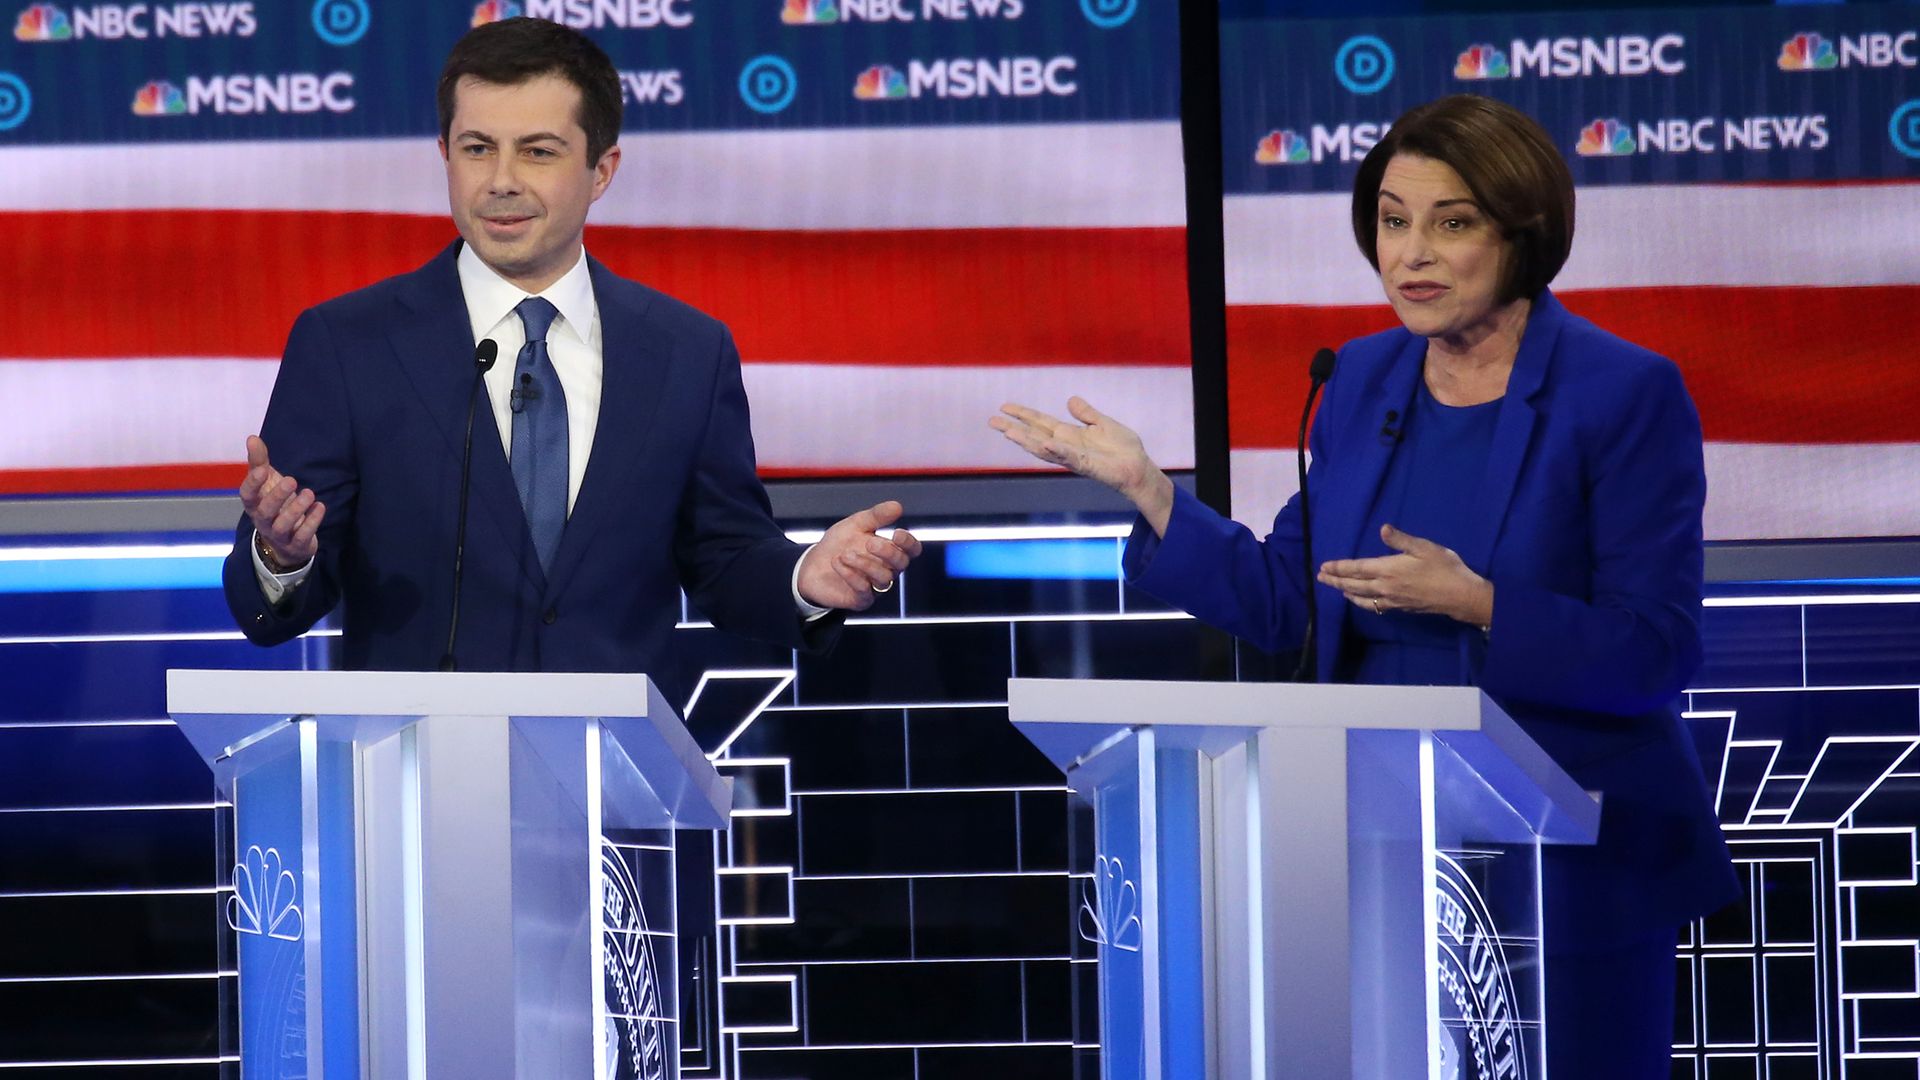 In this image, Buttigieg and Klobuchar stand next to each other on the debate stage.